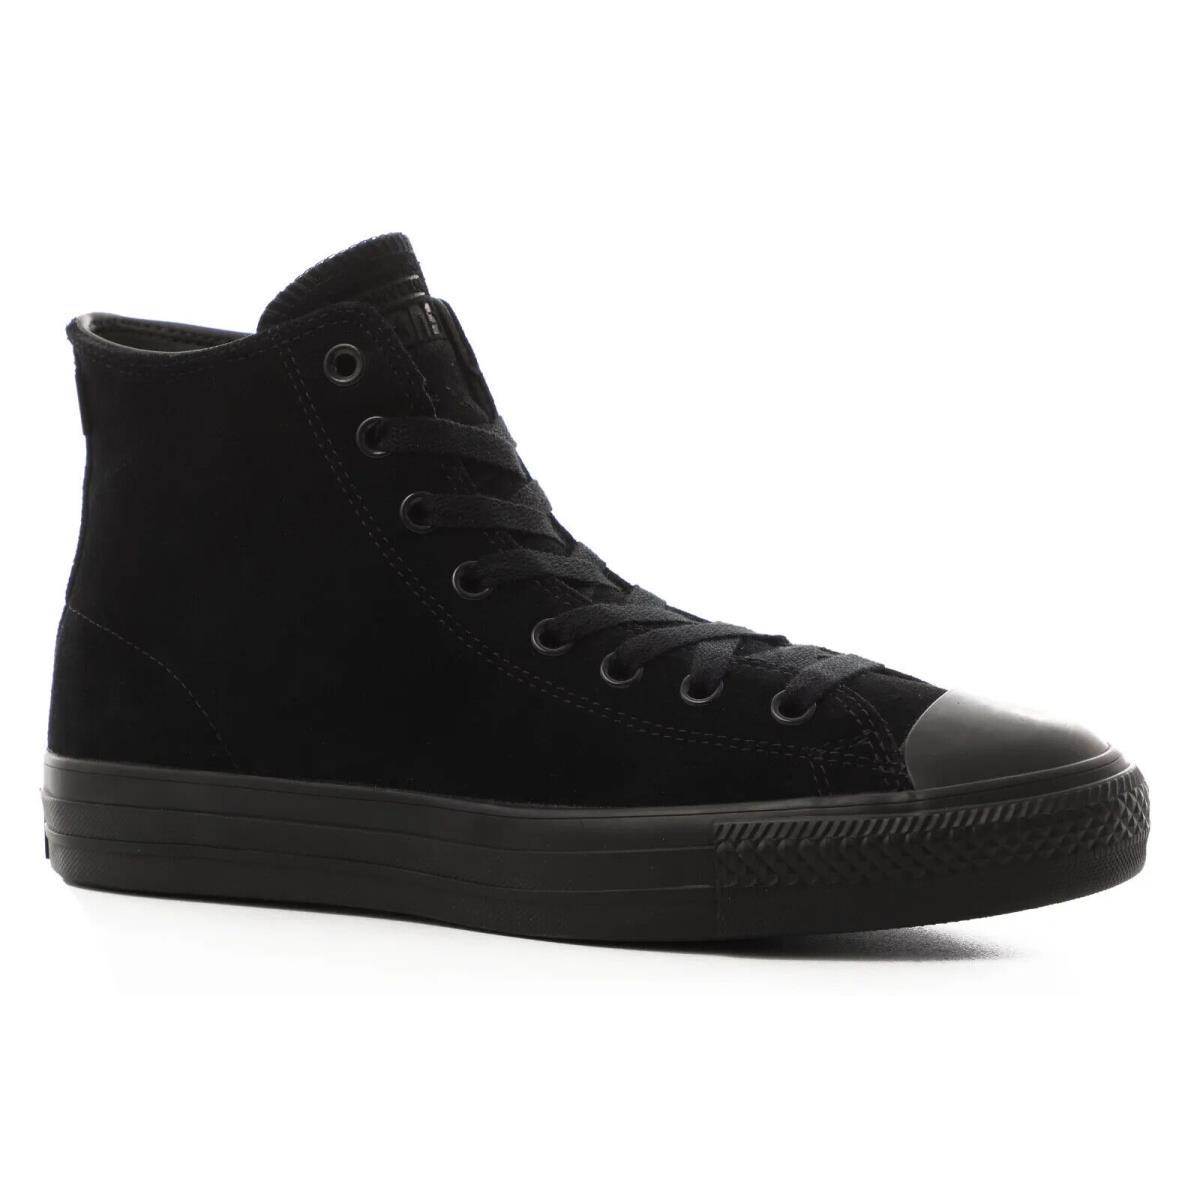 Unisex Converse Chuck Taylor All Star Pro High Skate Shoes - Black